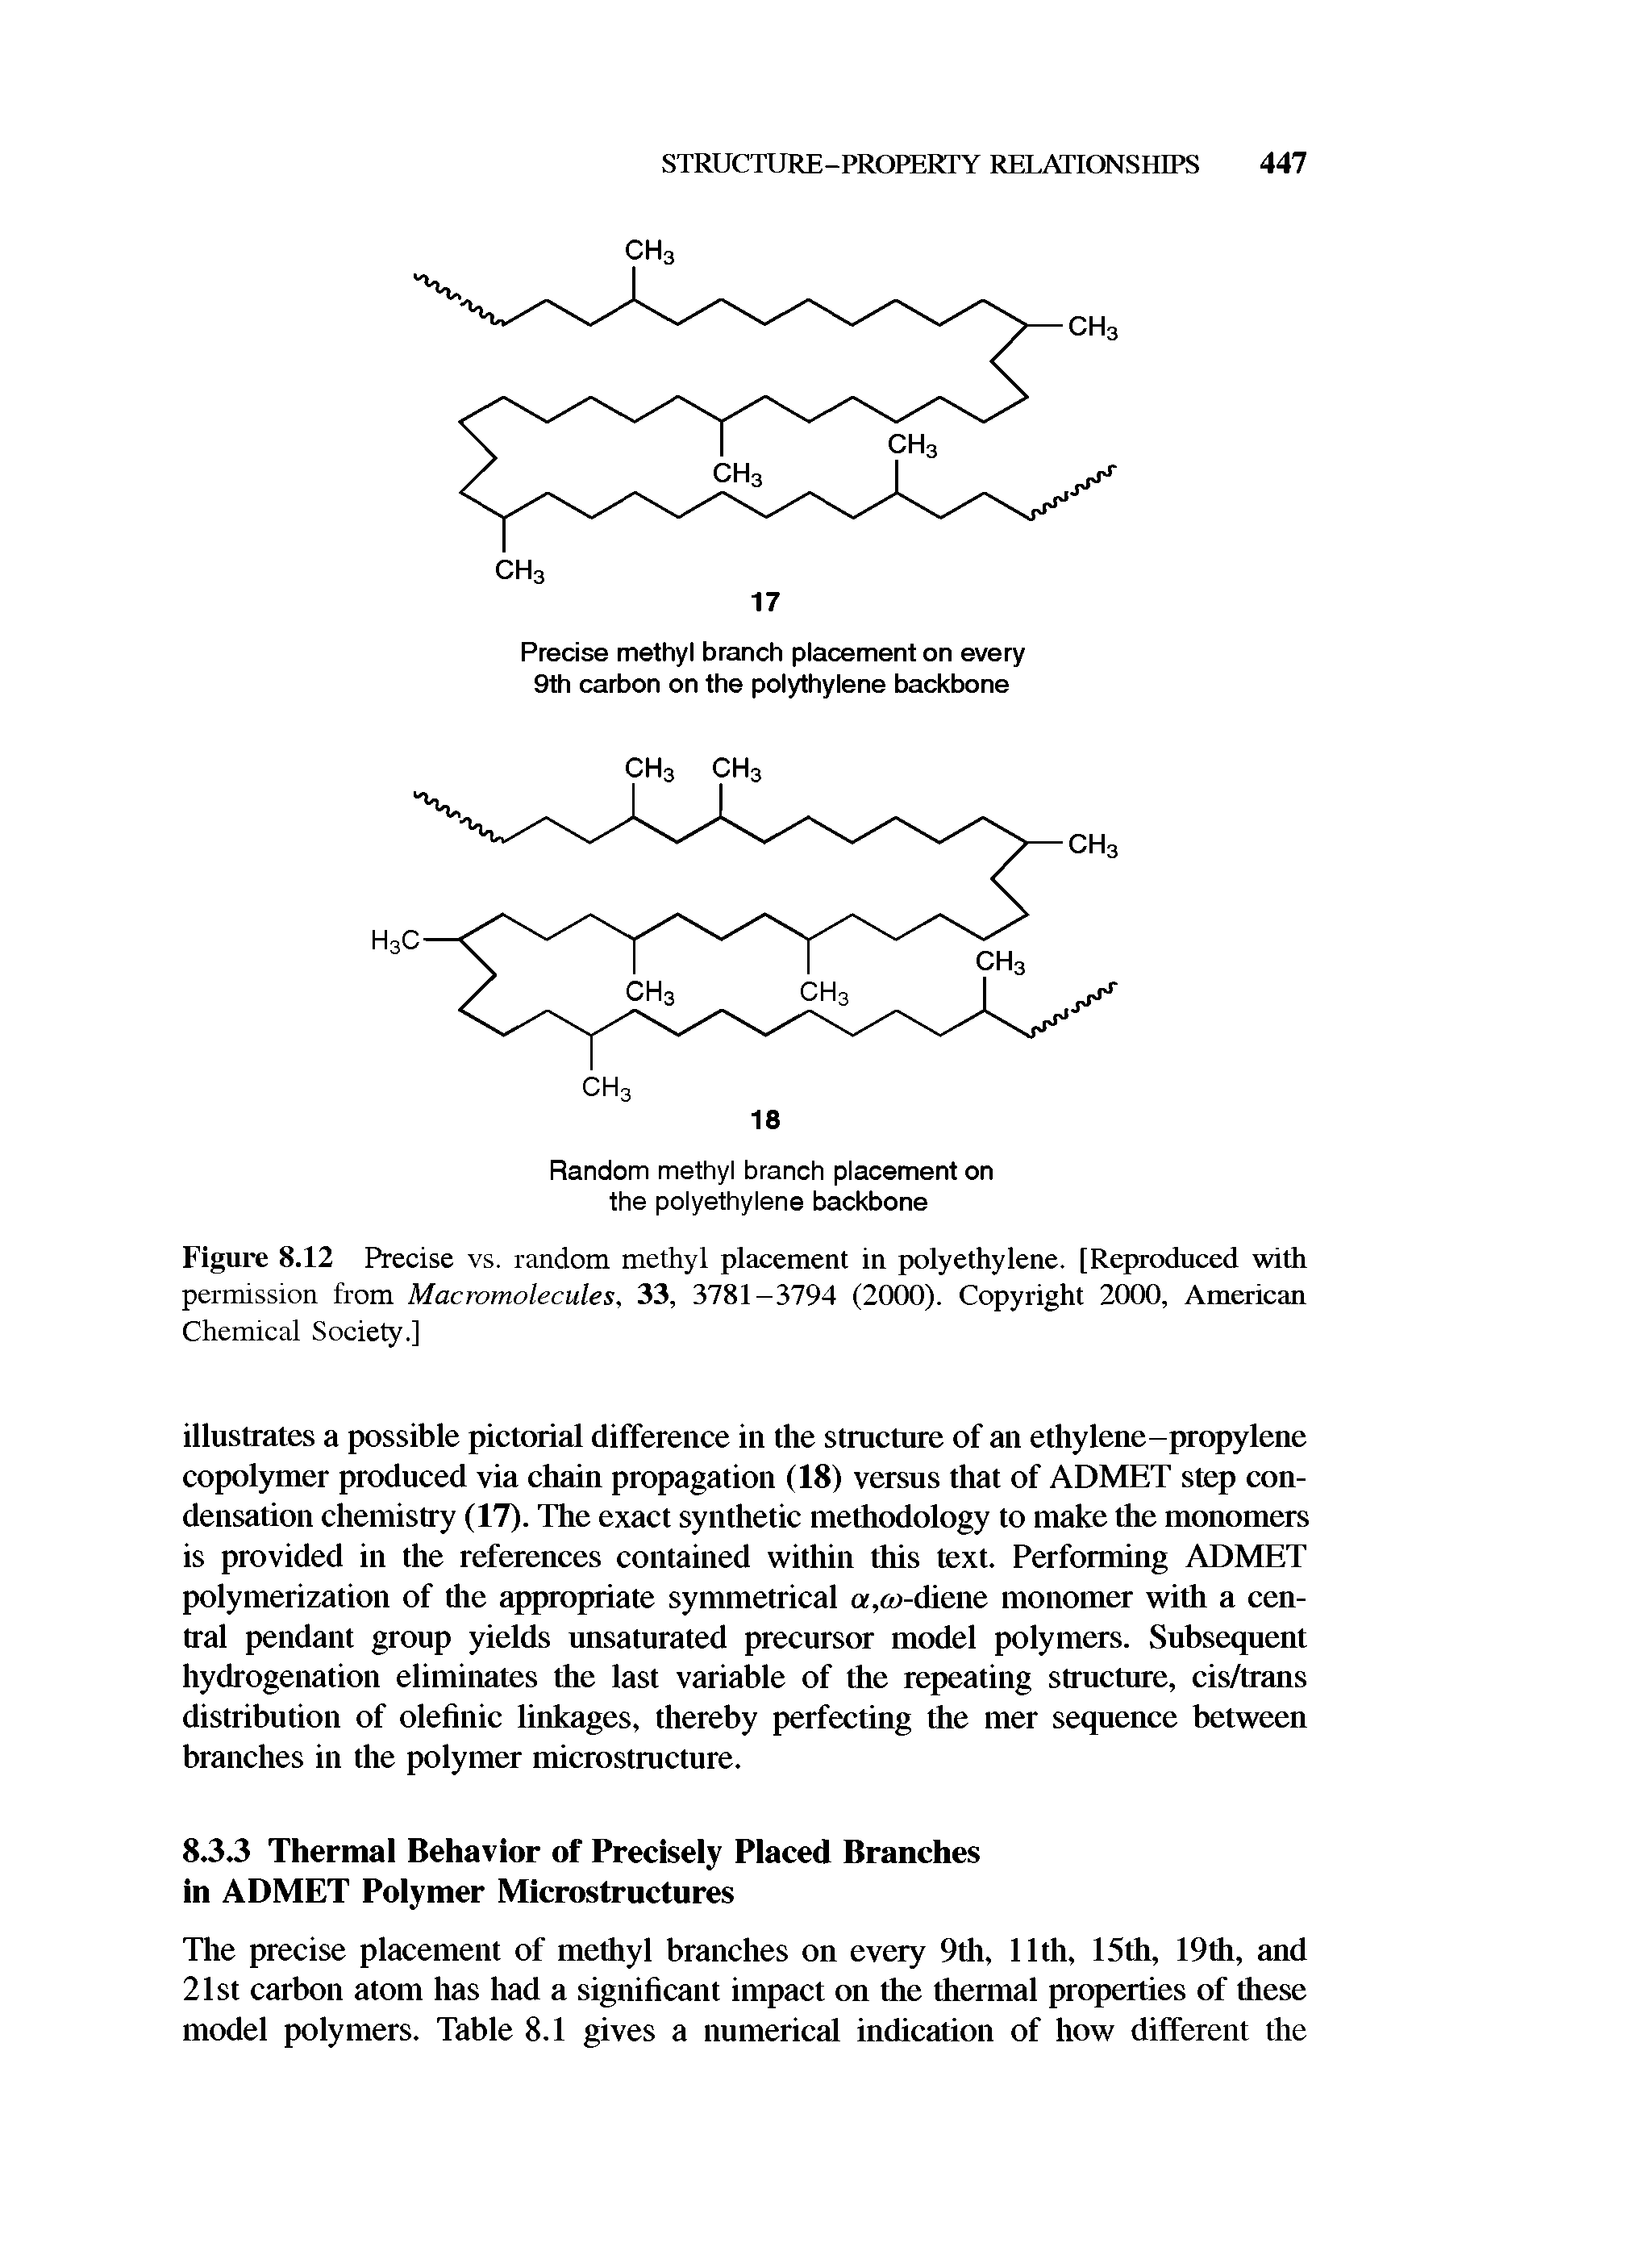 Figure 8.12 Precise vs. random methyl placement in polyethylene. [Reproduced with permission from Macromolecules, 33, 3781-3794 (2000). Copyright 2000, American Chemical Society.]...